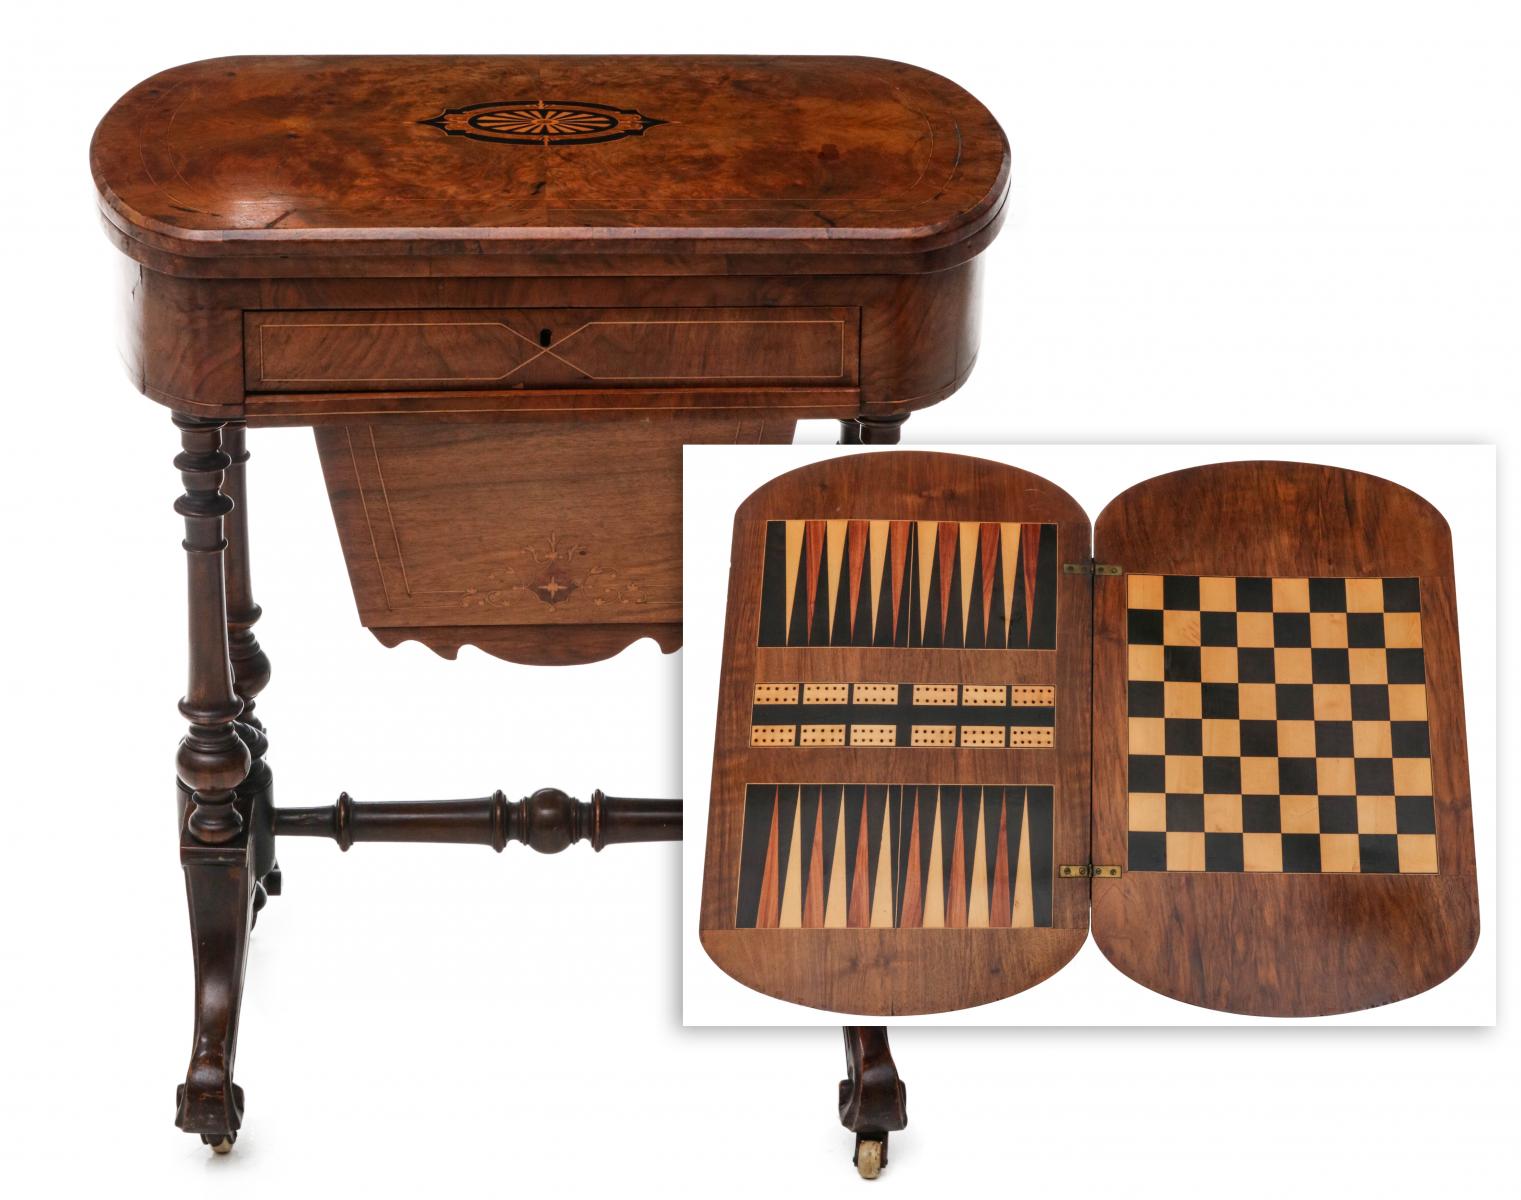 A FINE AND RARE BURLED SEWING STAND GAMES TABLE